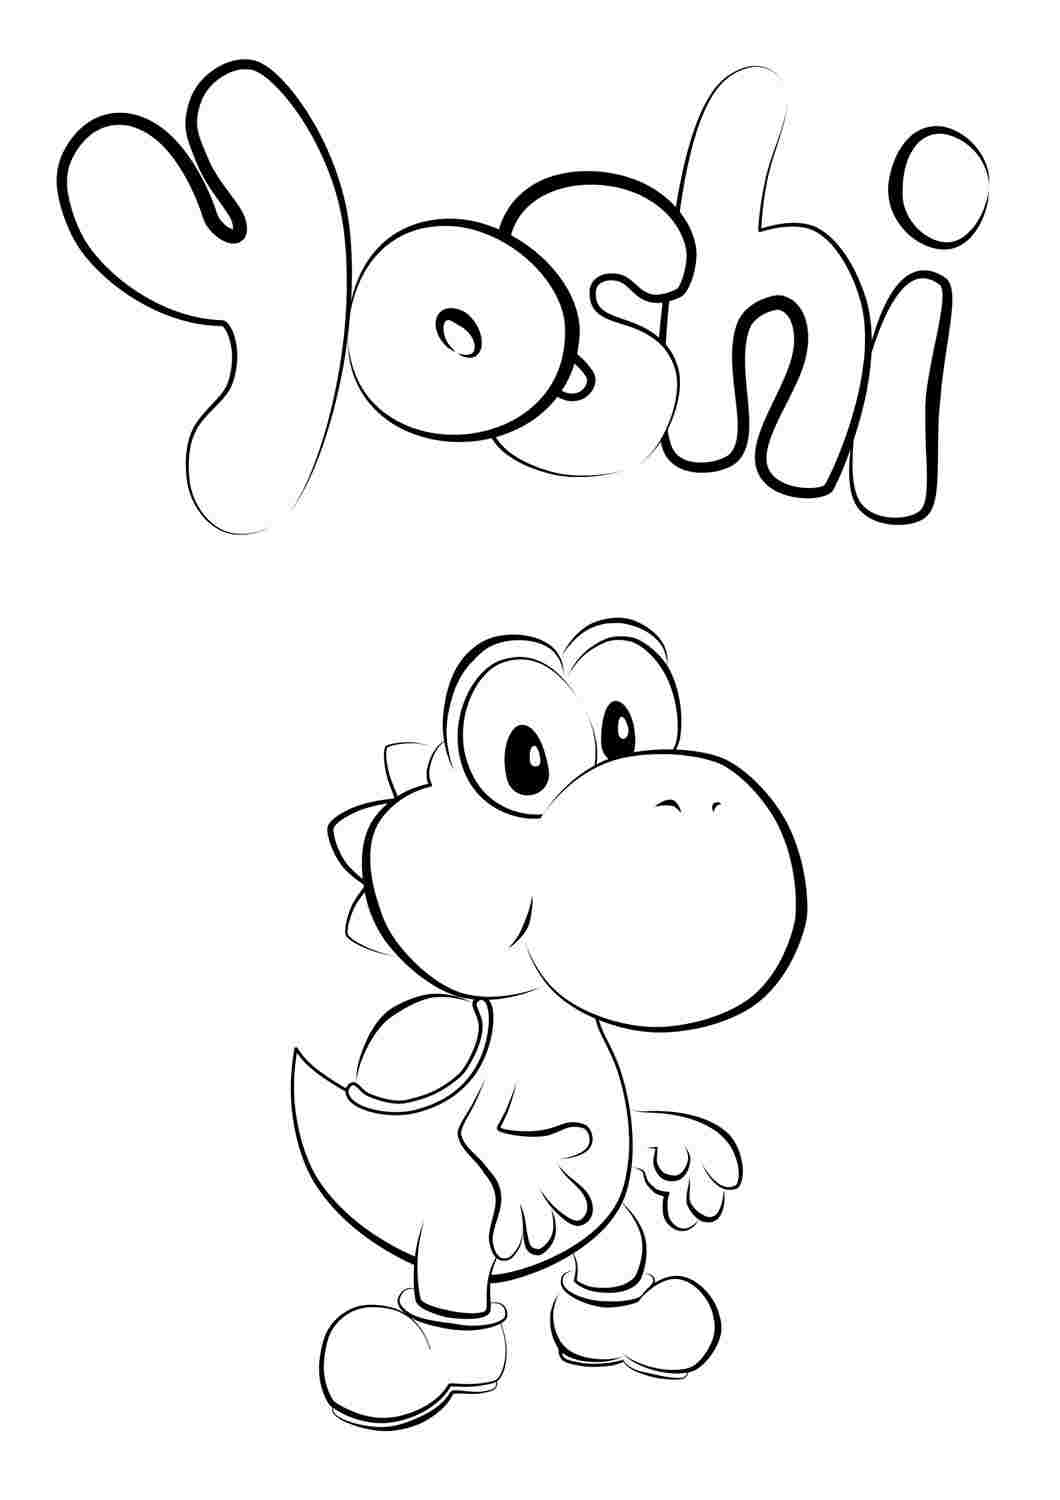 Baby Yoshi from Earth Evolution verion in Super Mario Bros Coloring Page